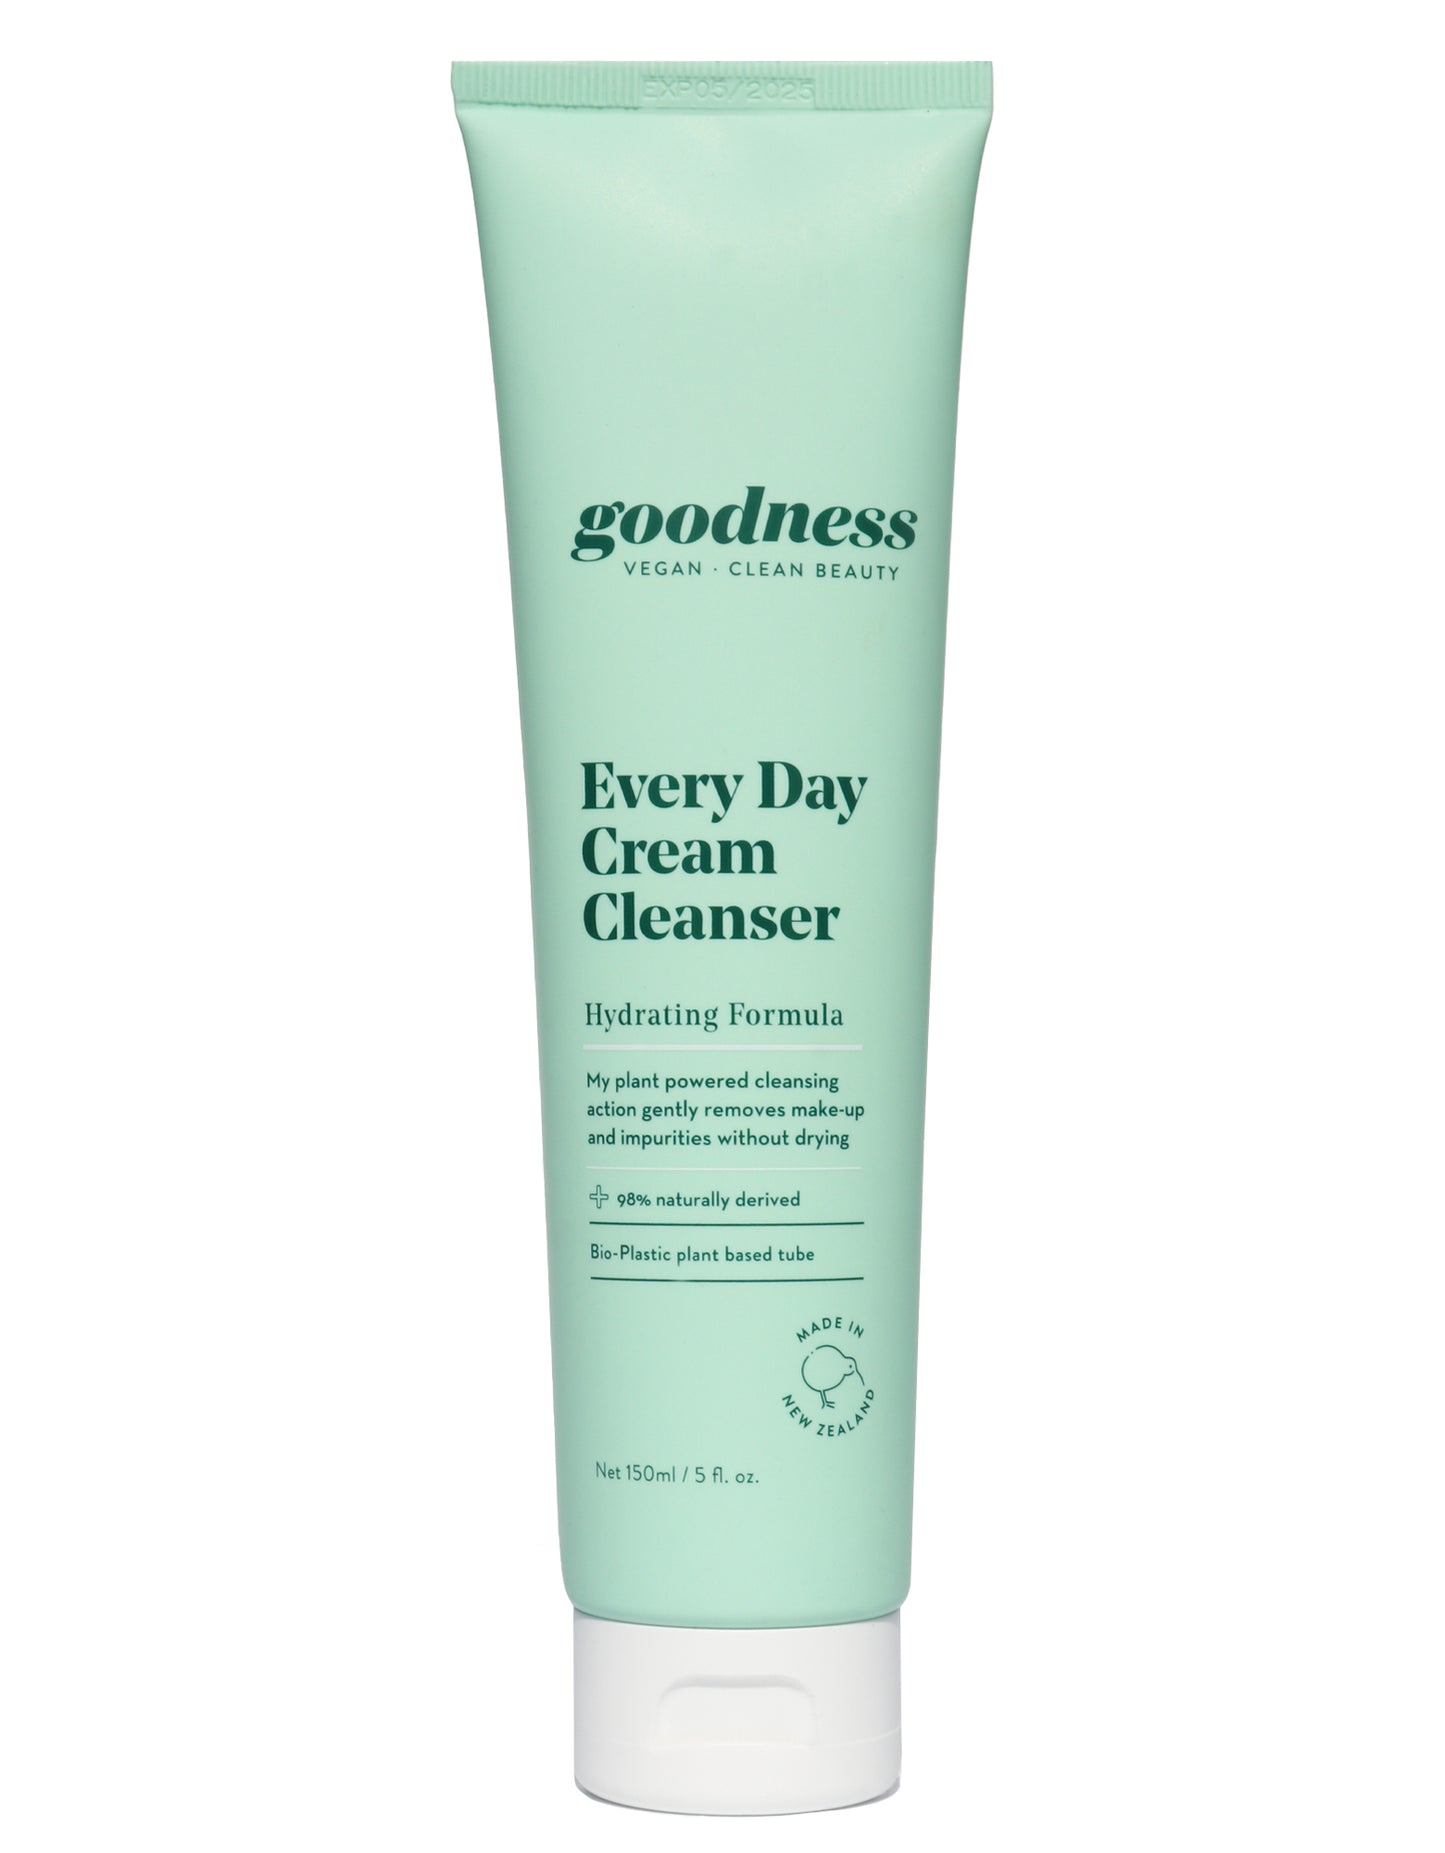 Every Day Cream Cleanser